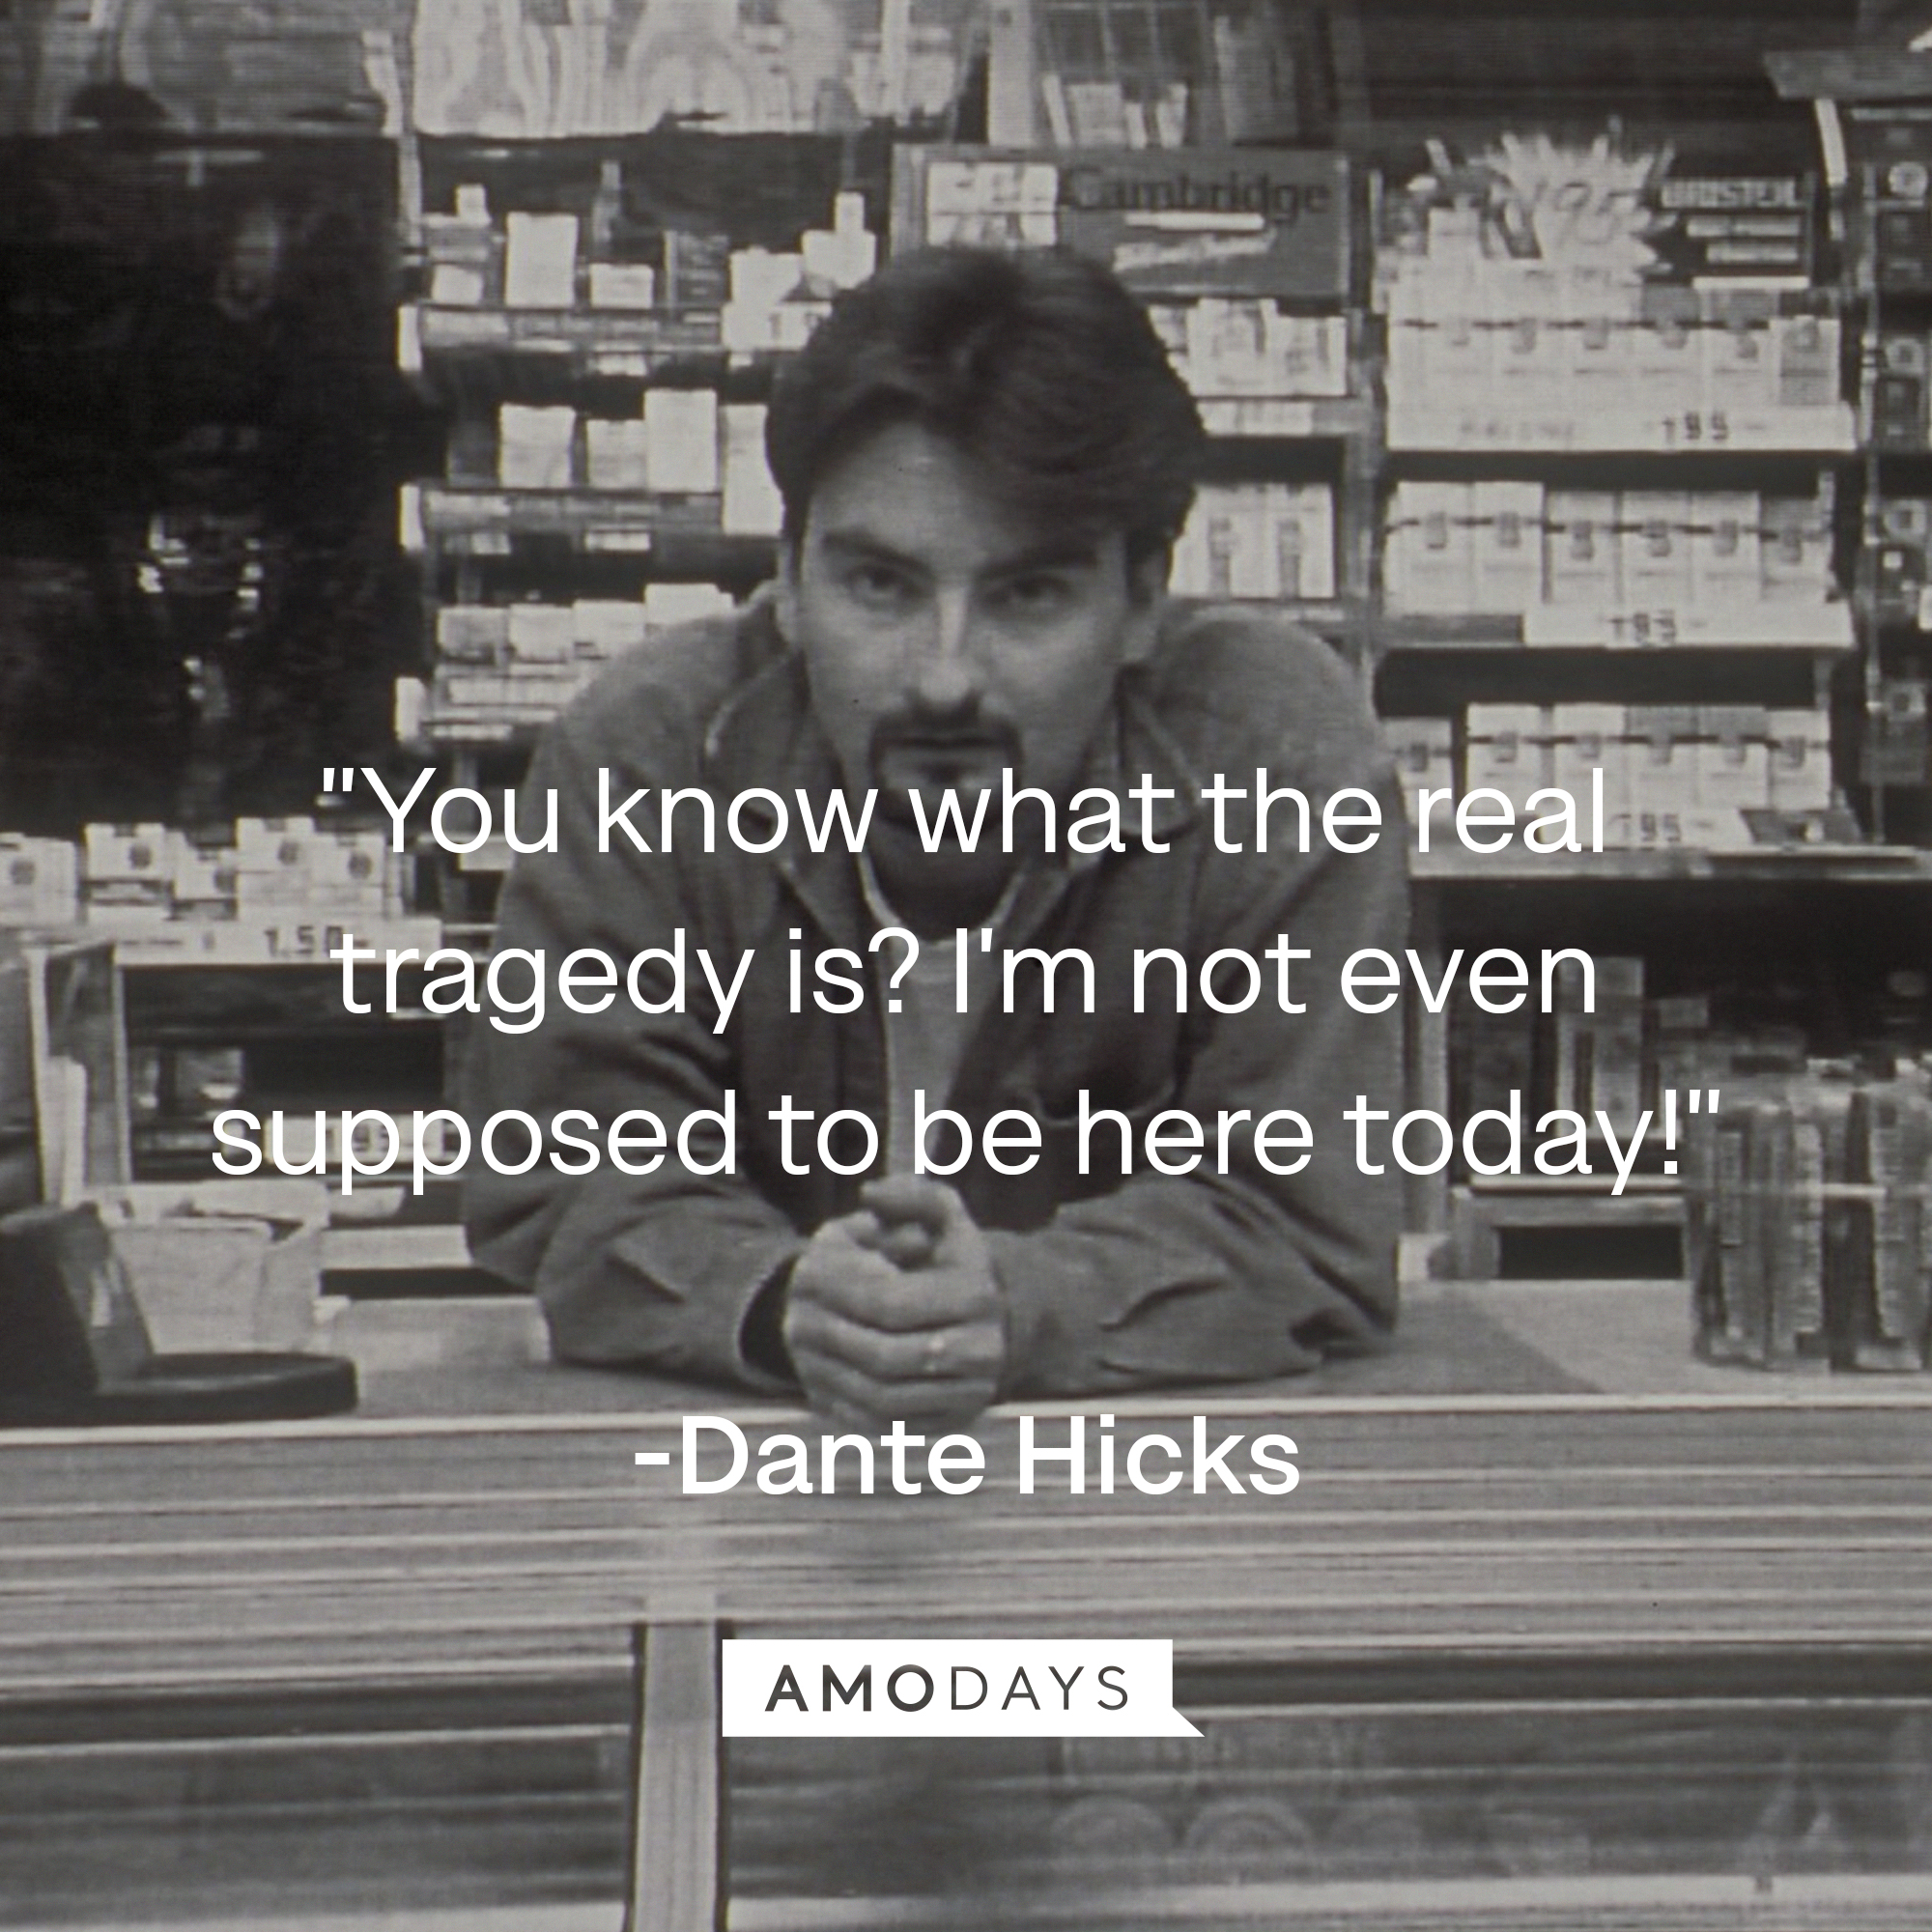 Dante Hicks' quote, "You know what the real tragedy is? I'm not even supposed to be here today!" | Source: Facebook/ClerksMovie